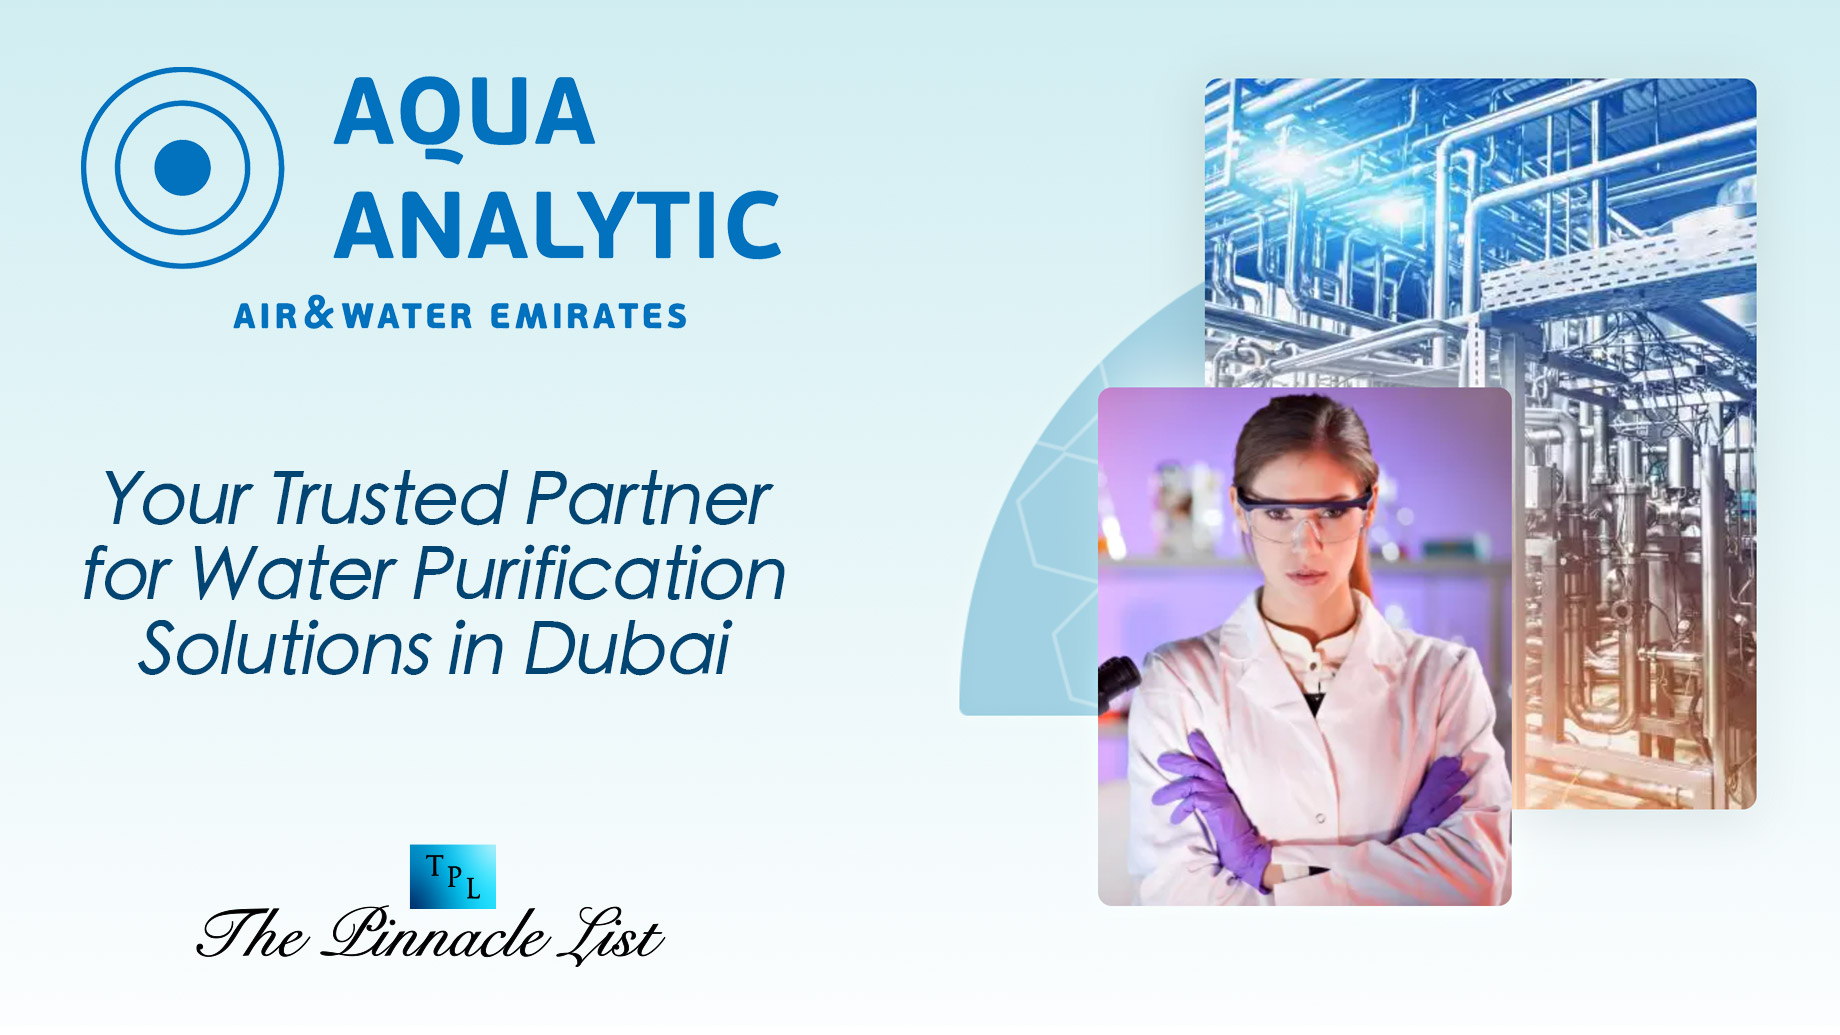 AQUAANALYTIC - Your Trusted Partner for Water Purification Solutions in Dubai